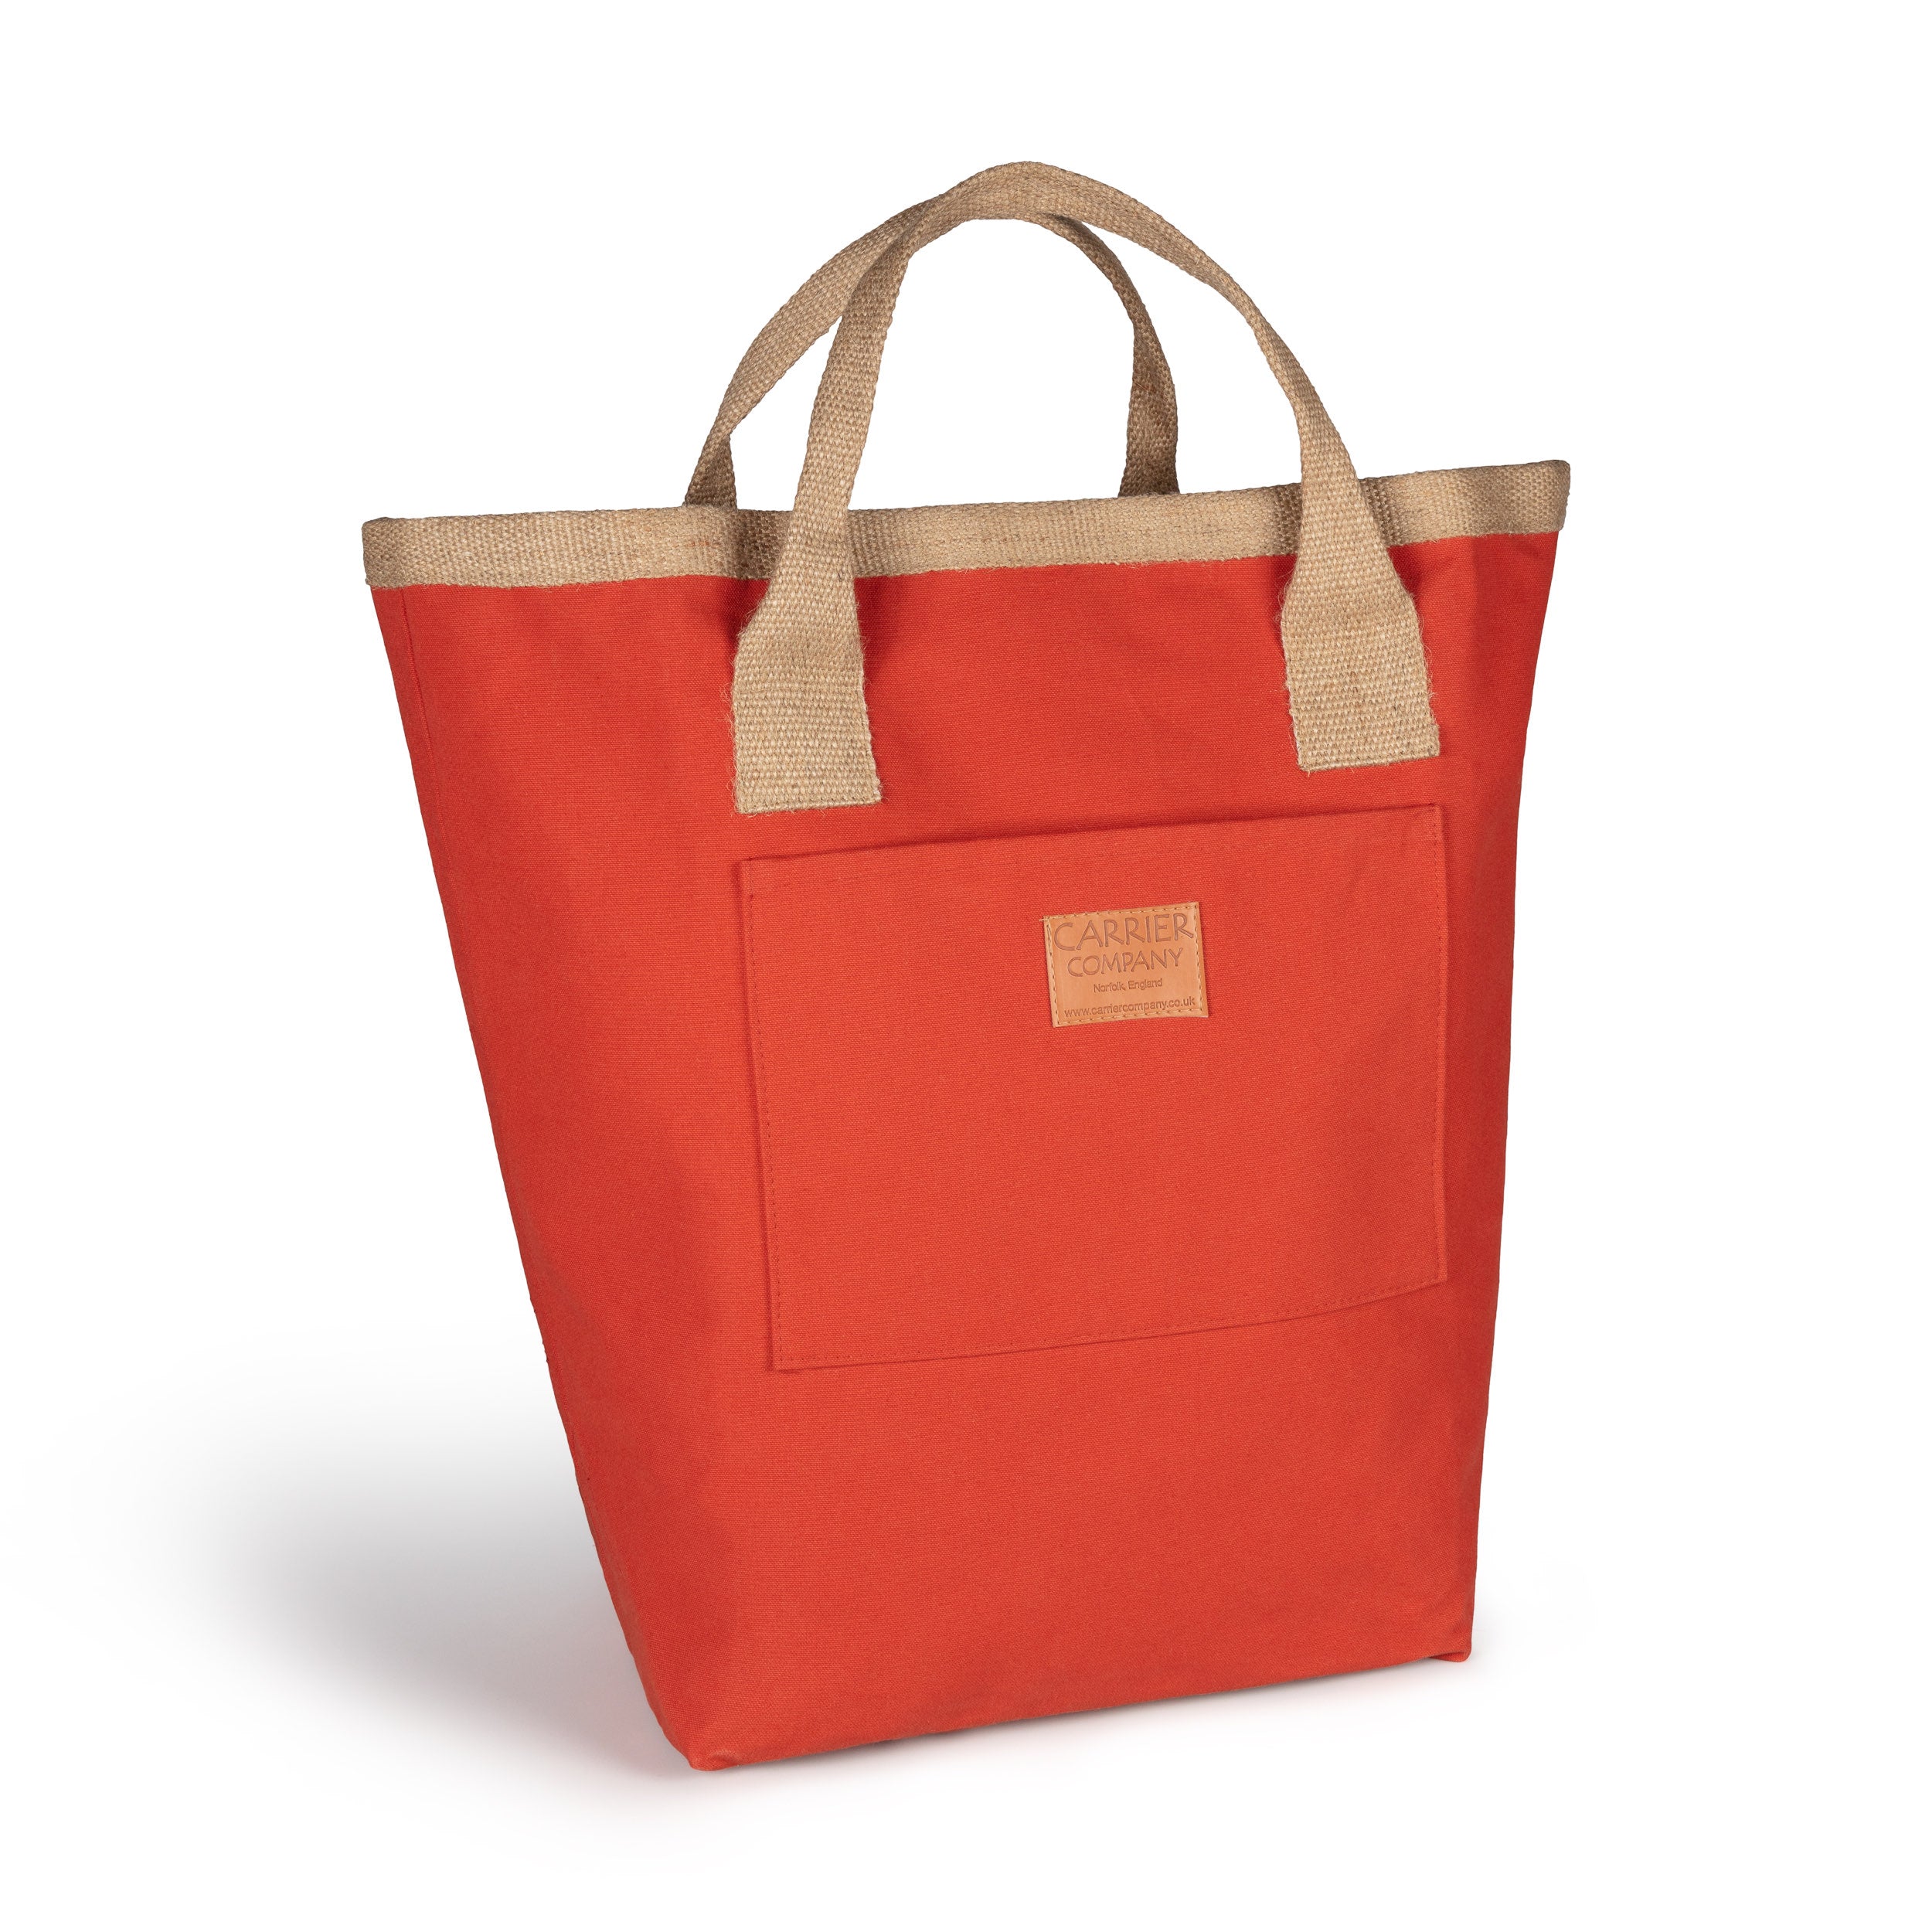 Carrier Company Loot and Boot Bag in Orange